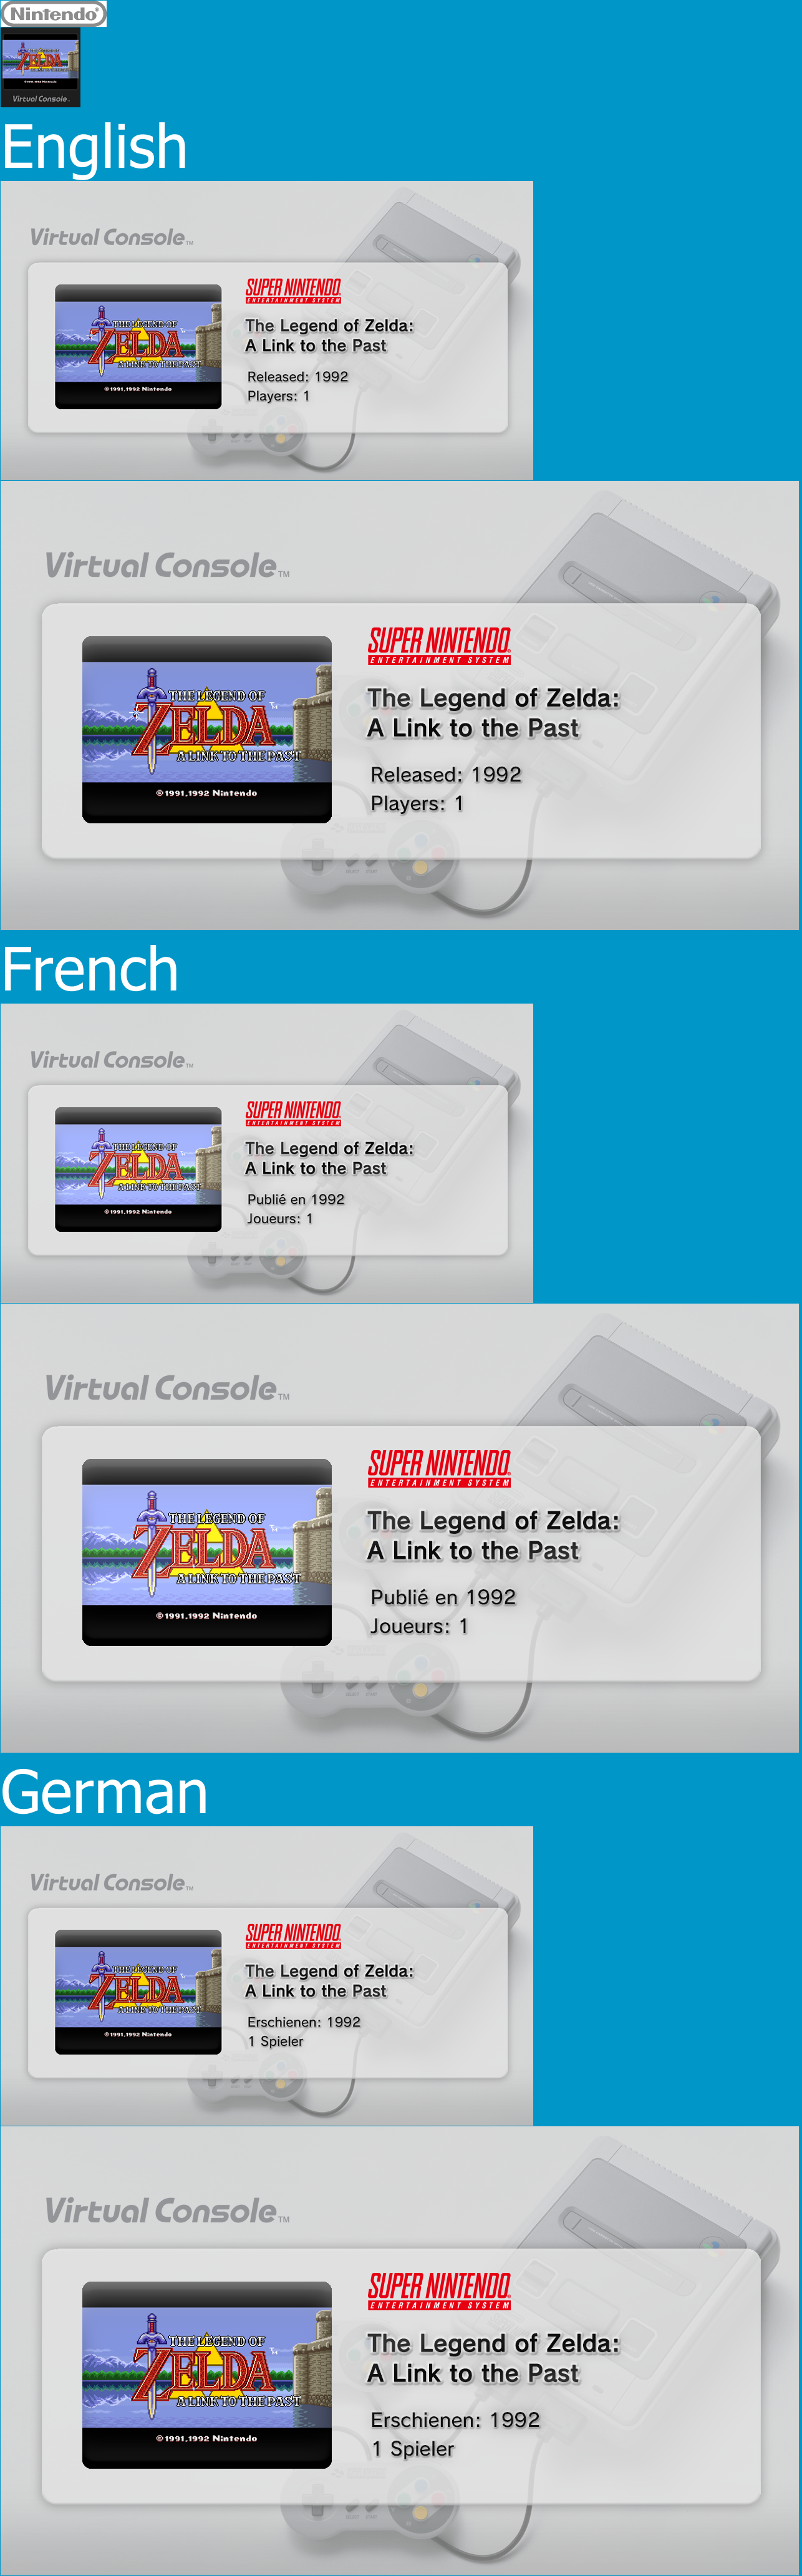 Virtual Console - The Legend of Zelda: A Link to the Past